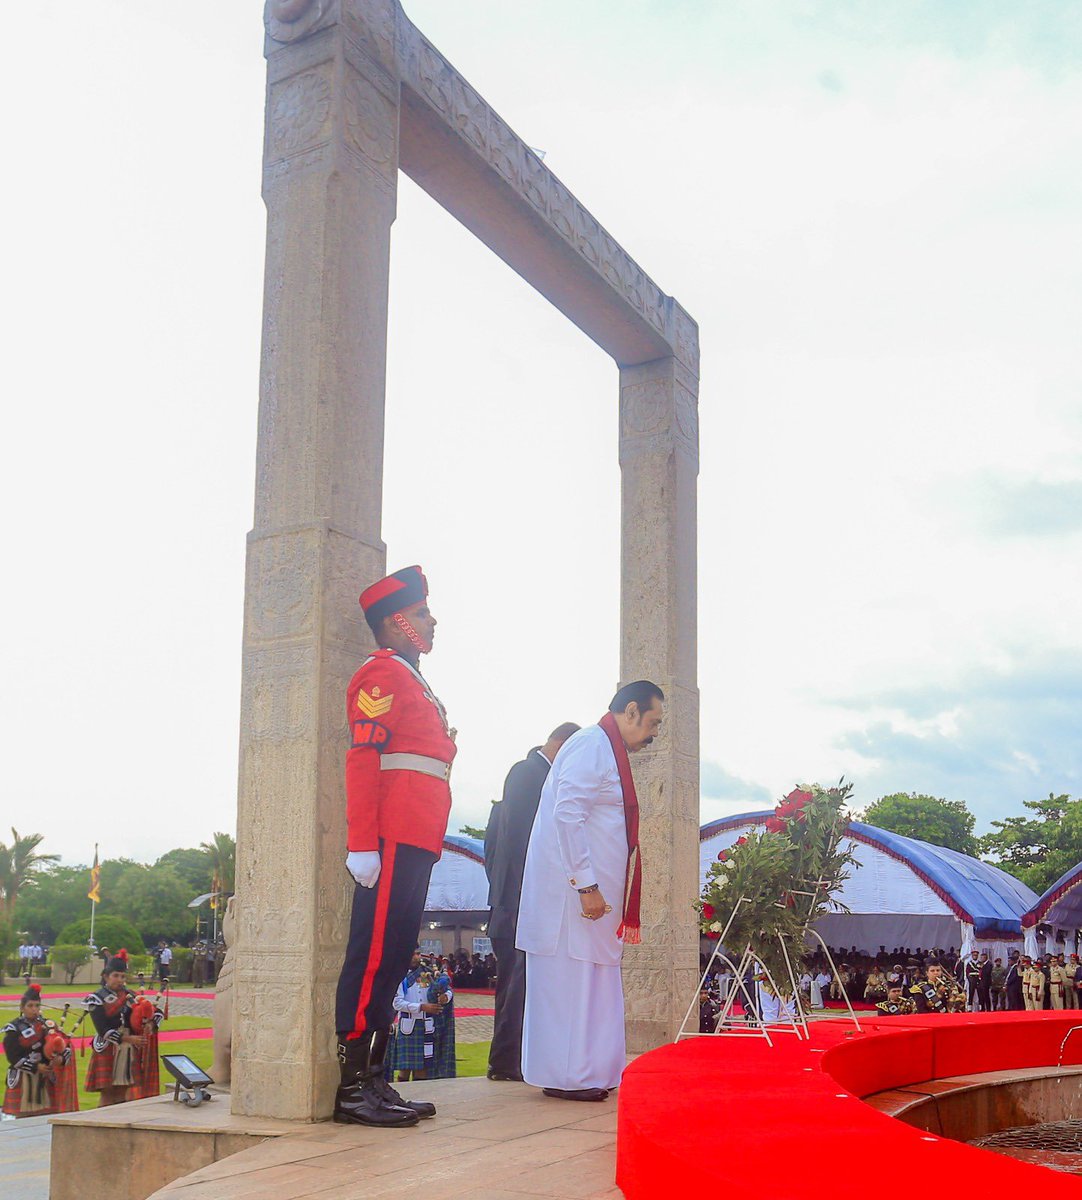 Today marks the 15th anniversary of Remembrance Day, commemorating the end of the 30-year Civil War and honoring the soldiers and civilians who lost their lives. Former President Hon.@PresRajapaksa , who led the country to victory, attended the remembrance ceremony.